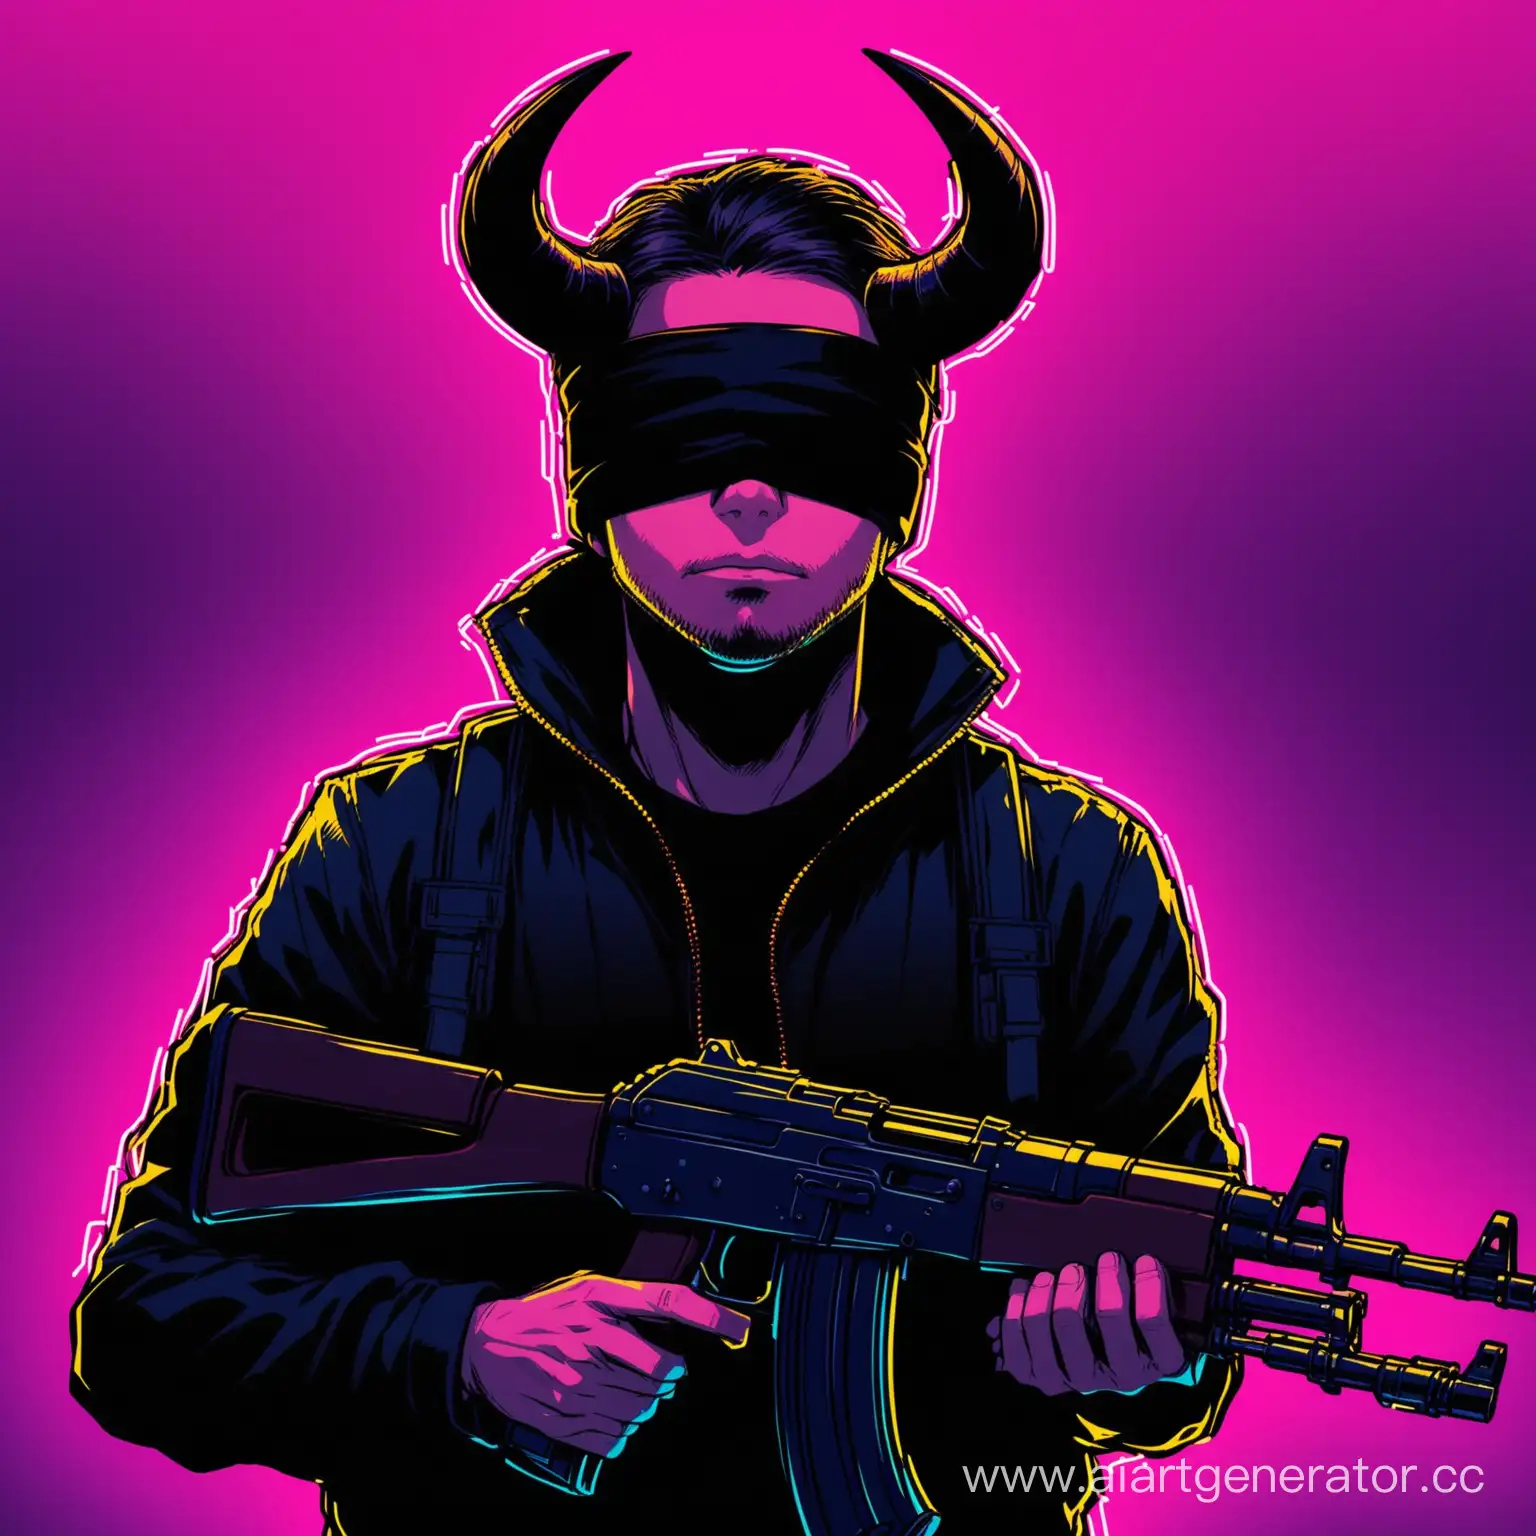 Sinister-Horned-Man-with-Blindfold-and-AK47-in-Neon-Light